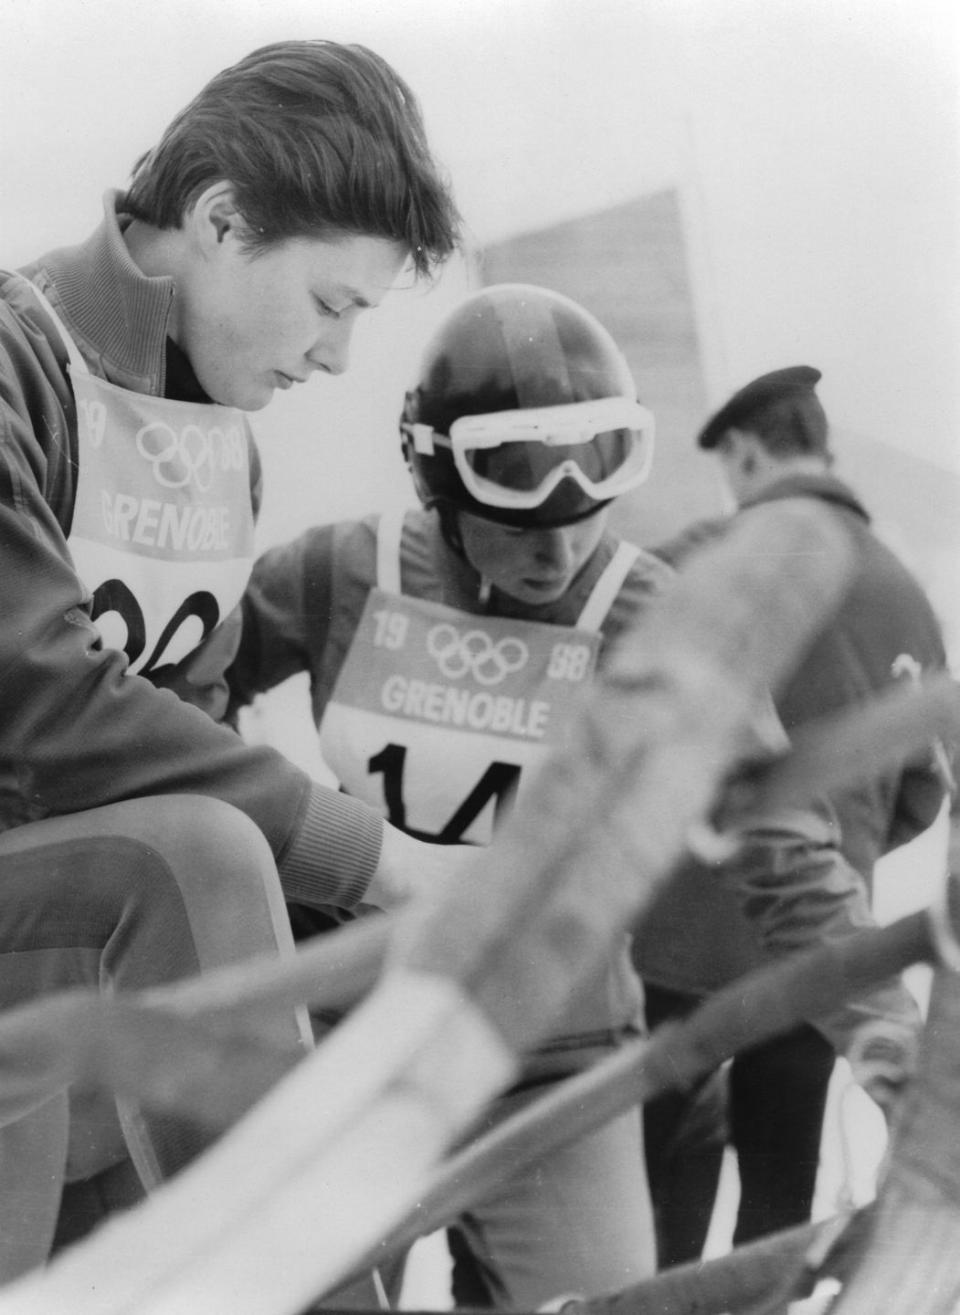 1968: East Germany's Luge Team Gets Disqualified